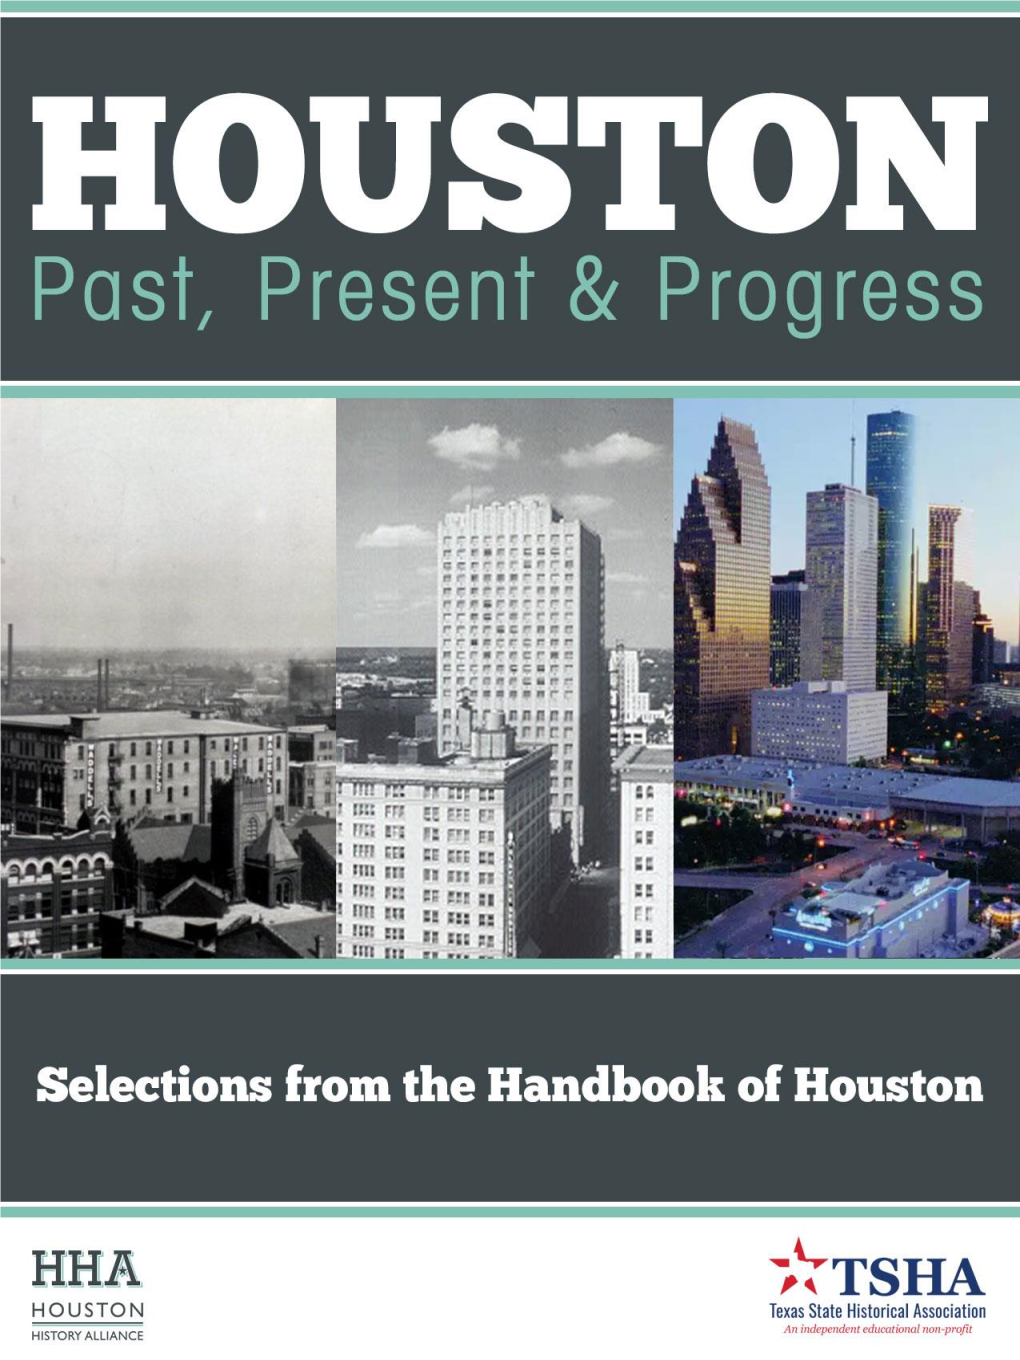 Houston Often Is Eclipsed by the Alamo of San Antonio, the Ranches of West Texas, Or Even the “Weirdness” of Austin